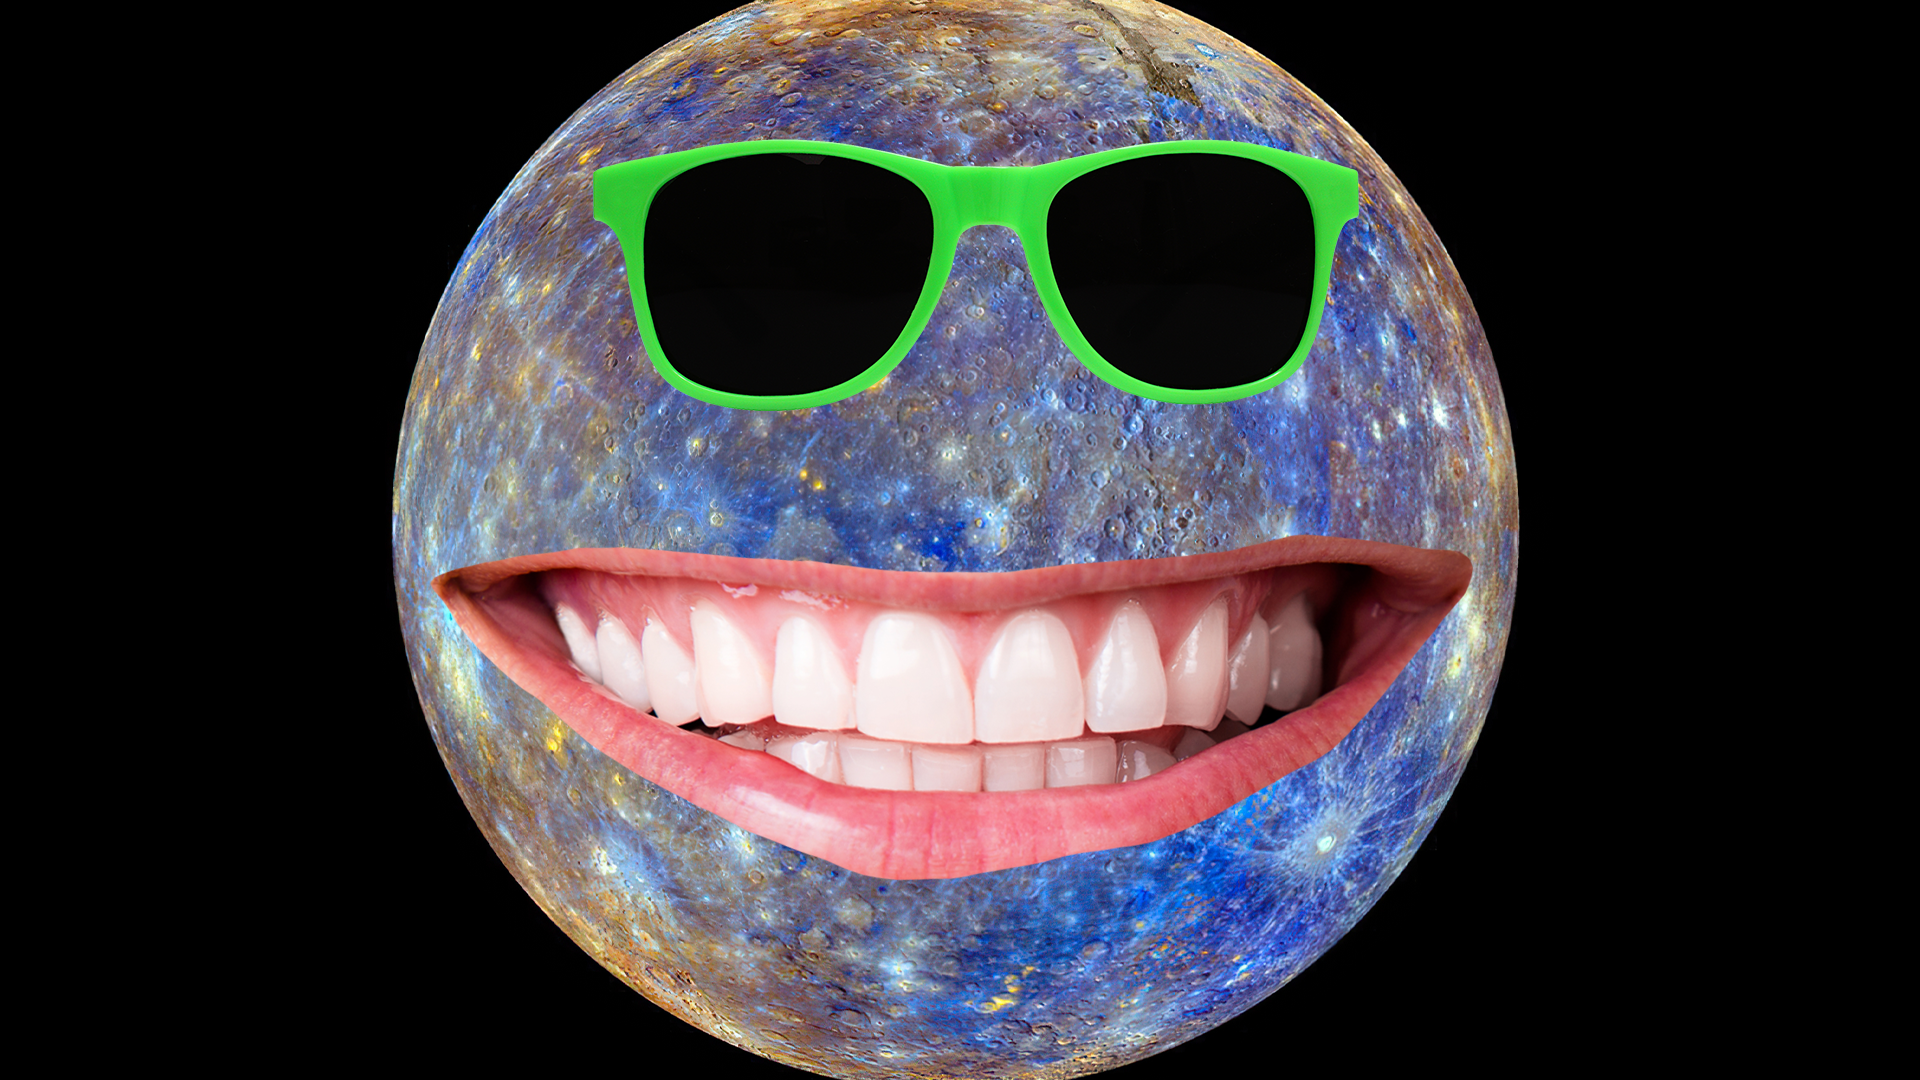 Cool dude planet